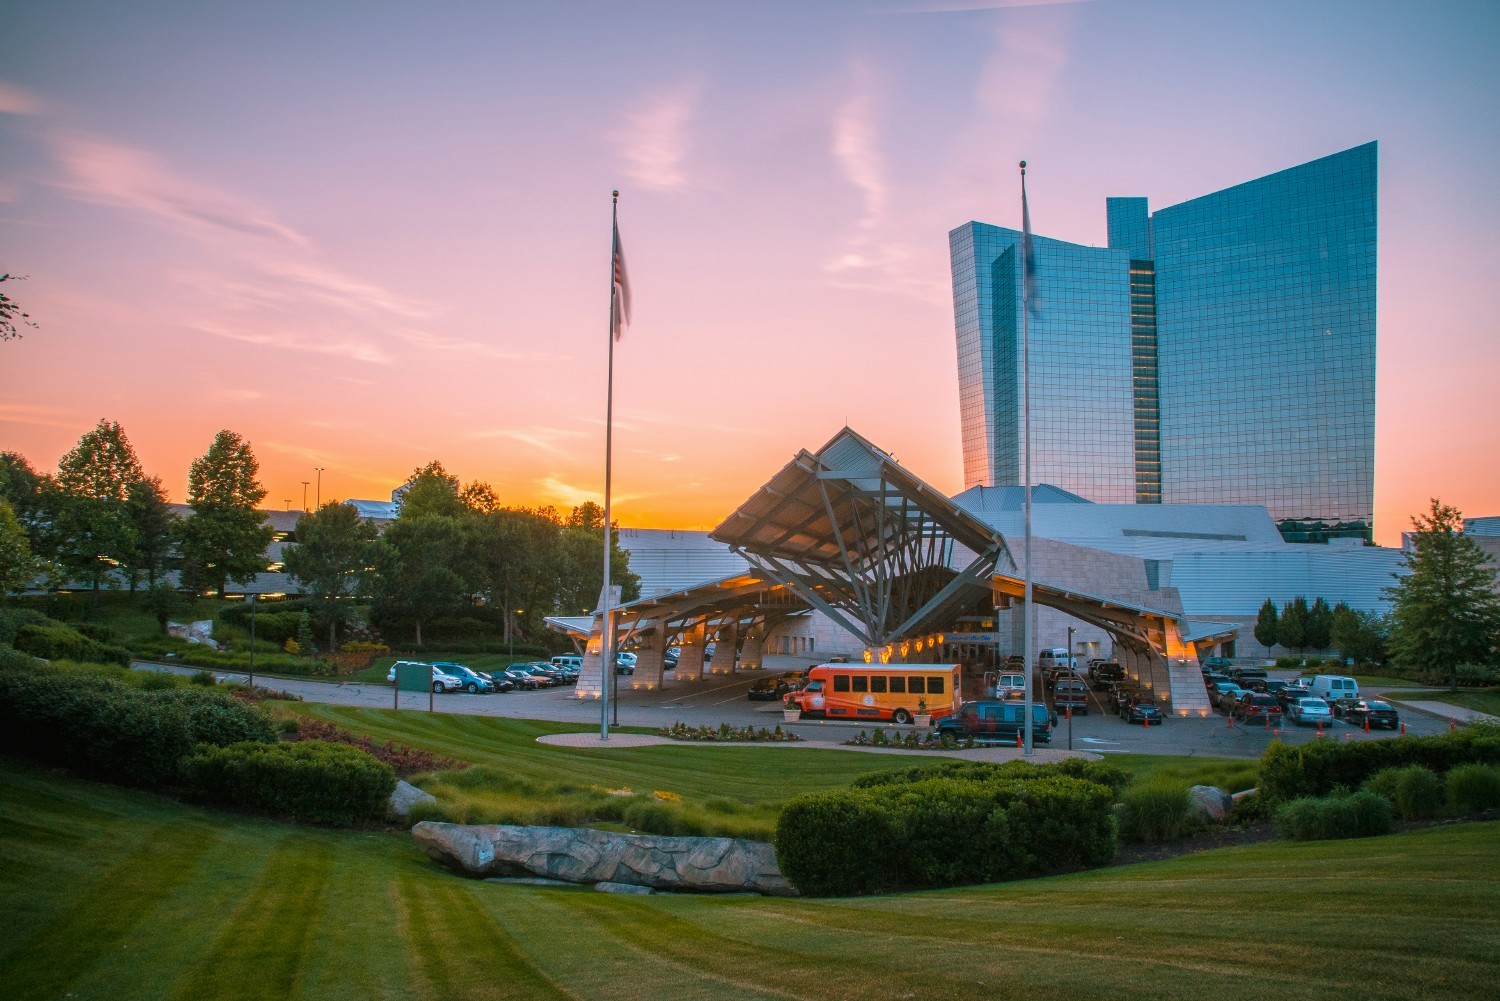 Created in 1996 by the Mohegan Tribe of Connecticut, Mohegan Sun is one of the world's most amazing destinations.